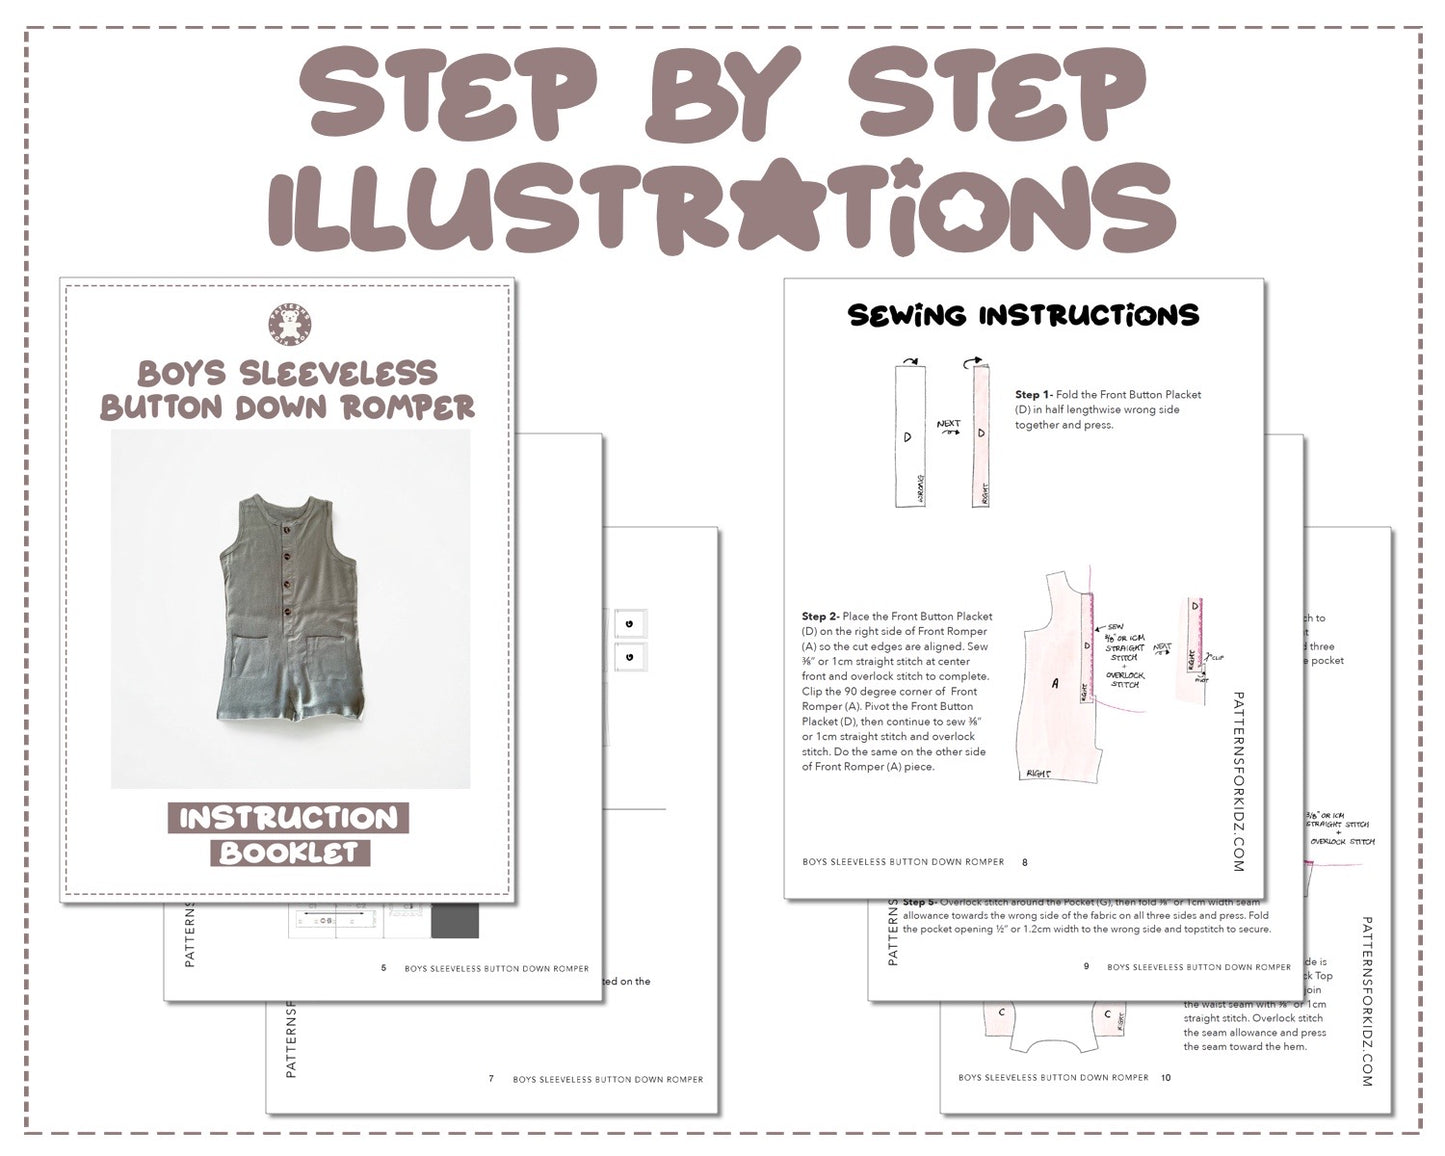 Sleeveless Button Down Romper sewing pattern step by step illustrations.